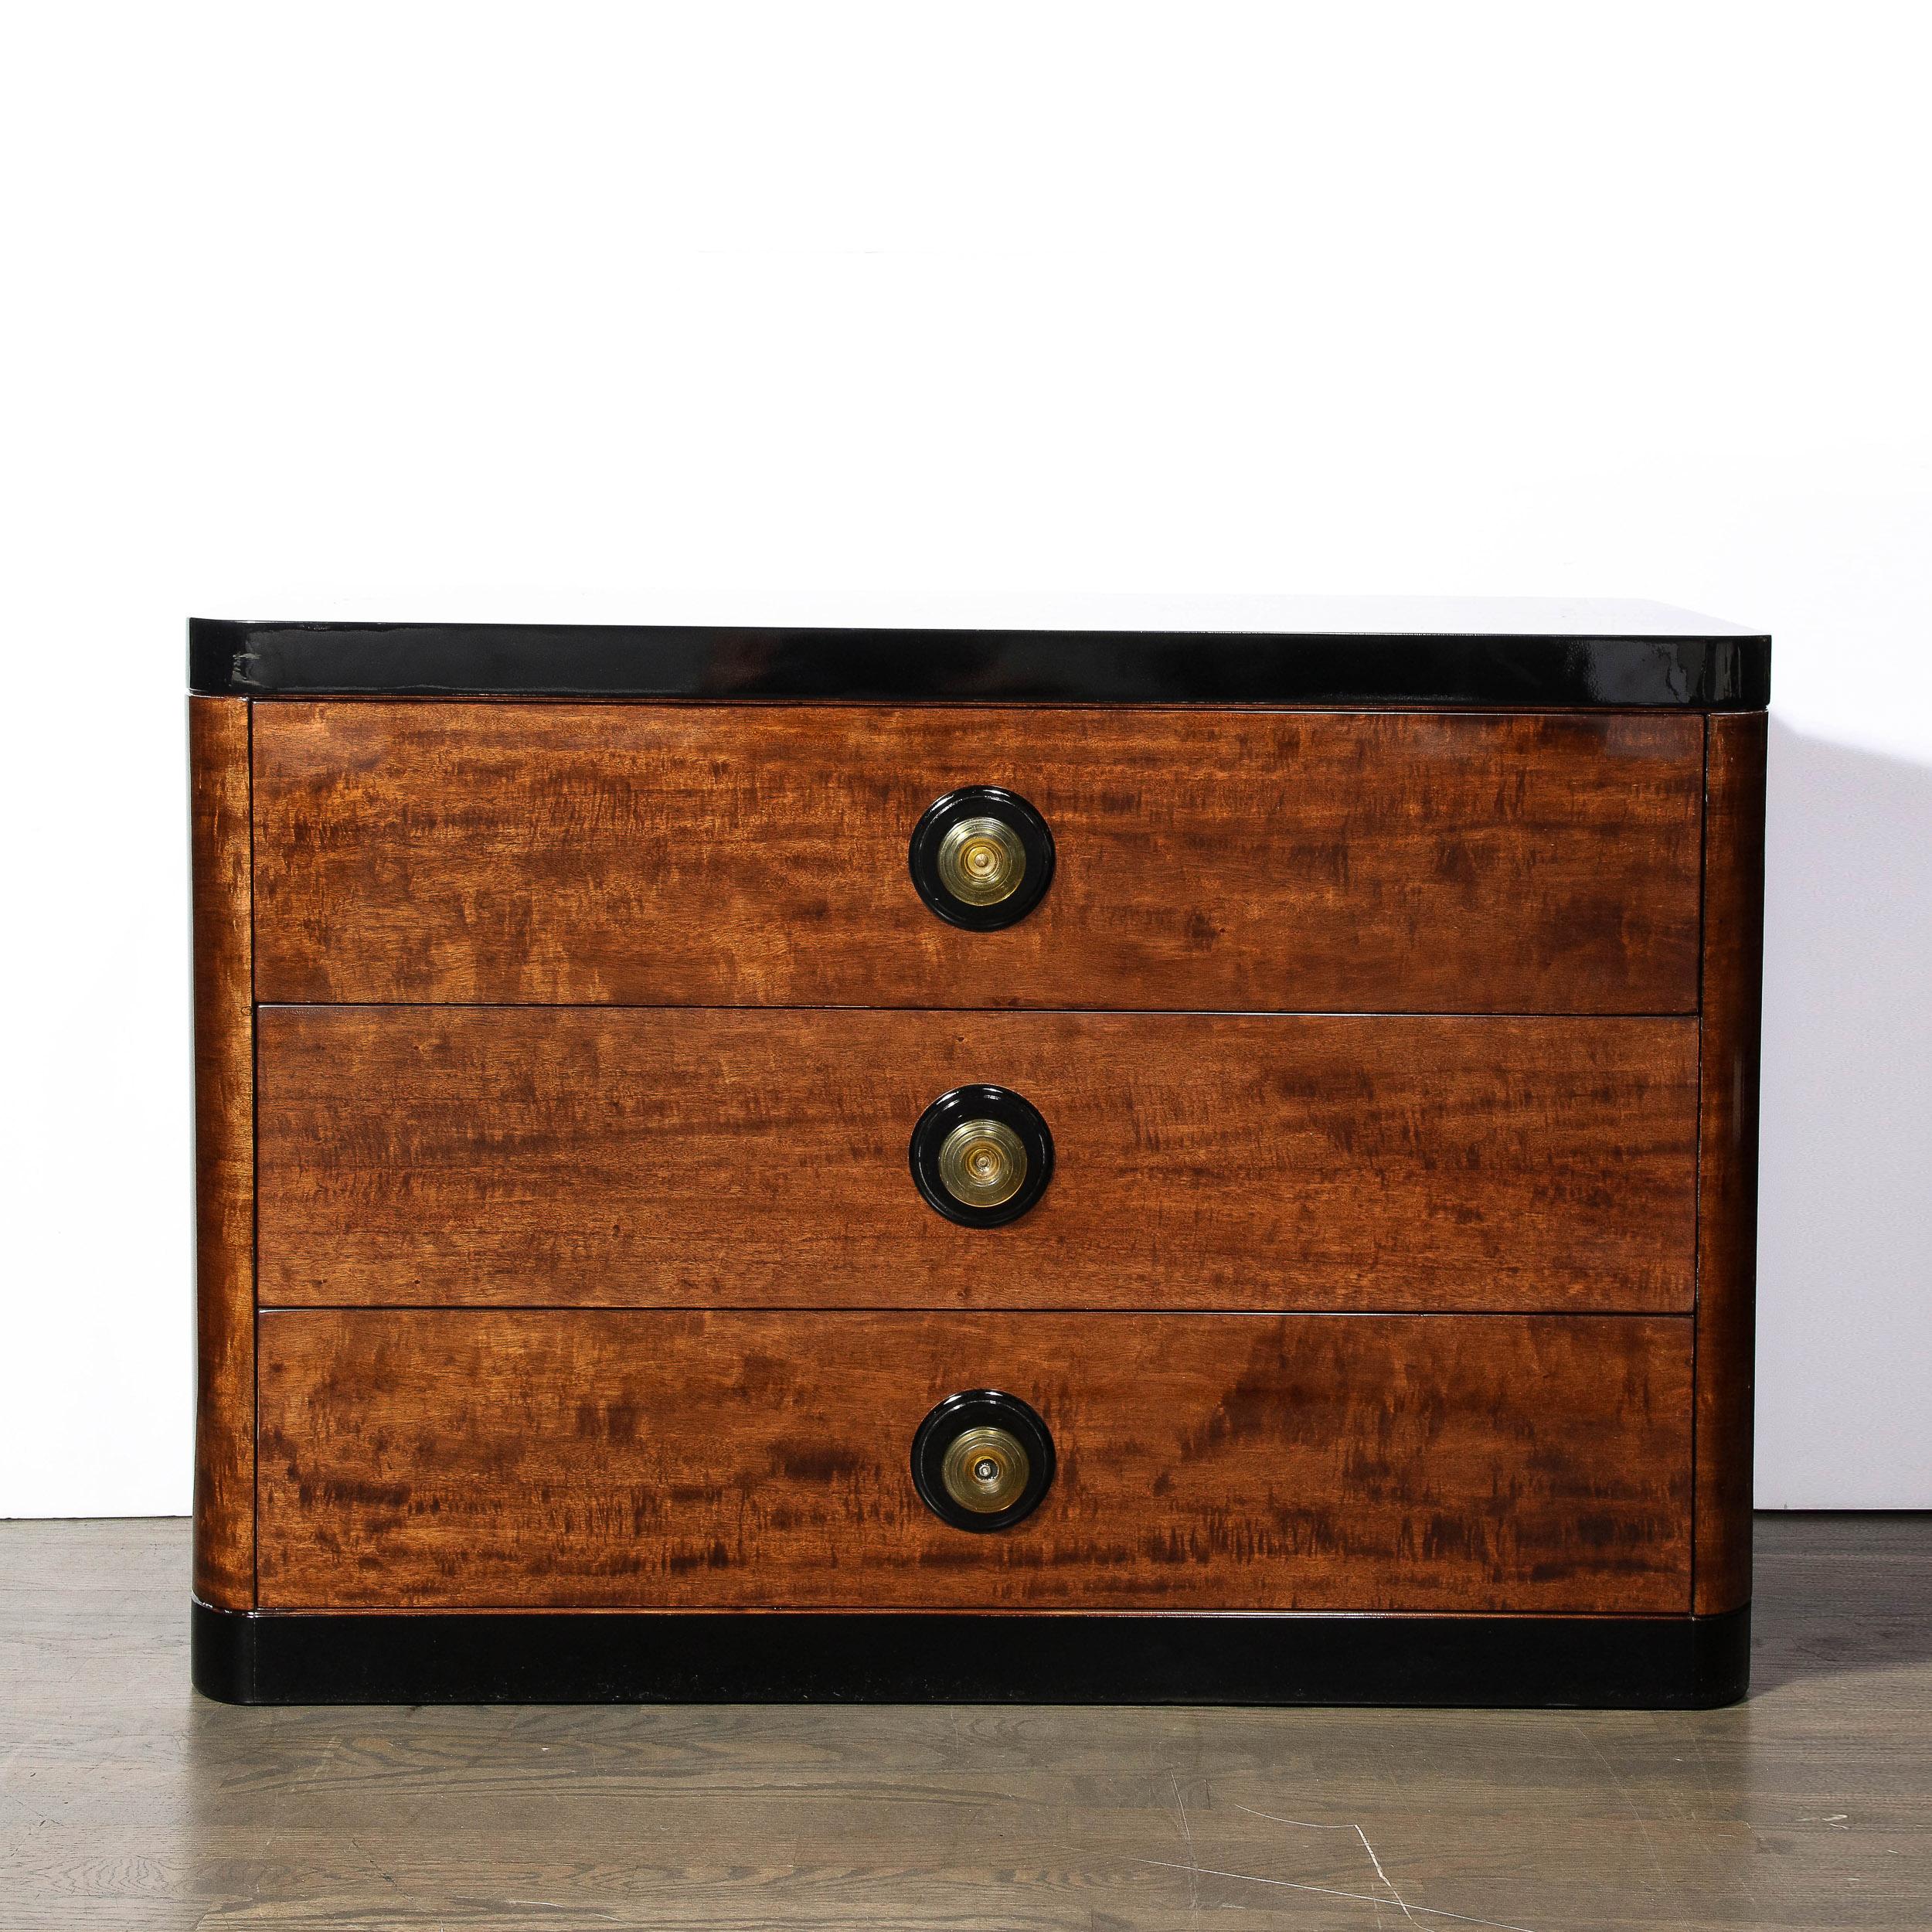 This Art Deco Machine Age  Chest in Book-matched and Burled Walnut with Amber Bakelite Pulls originates from the United States, Circa 1935. Streamlined and utilizing beautiful geometric proportions characteristic of period Art Deco designs, the